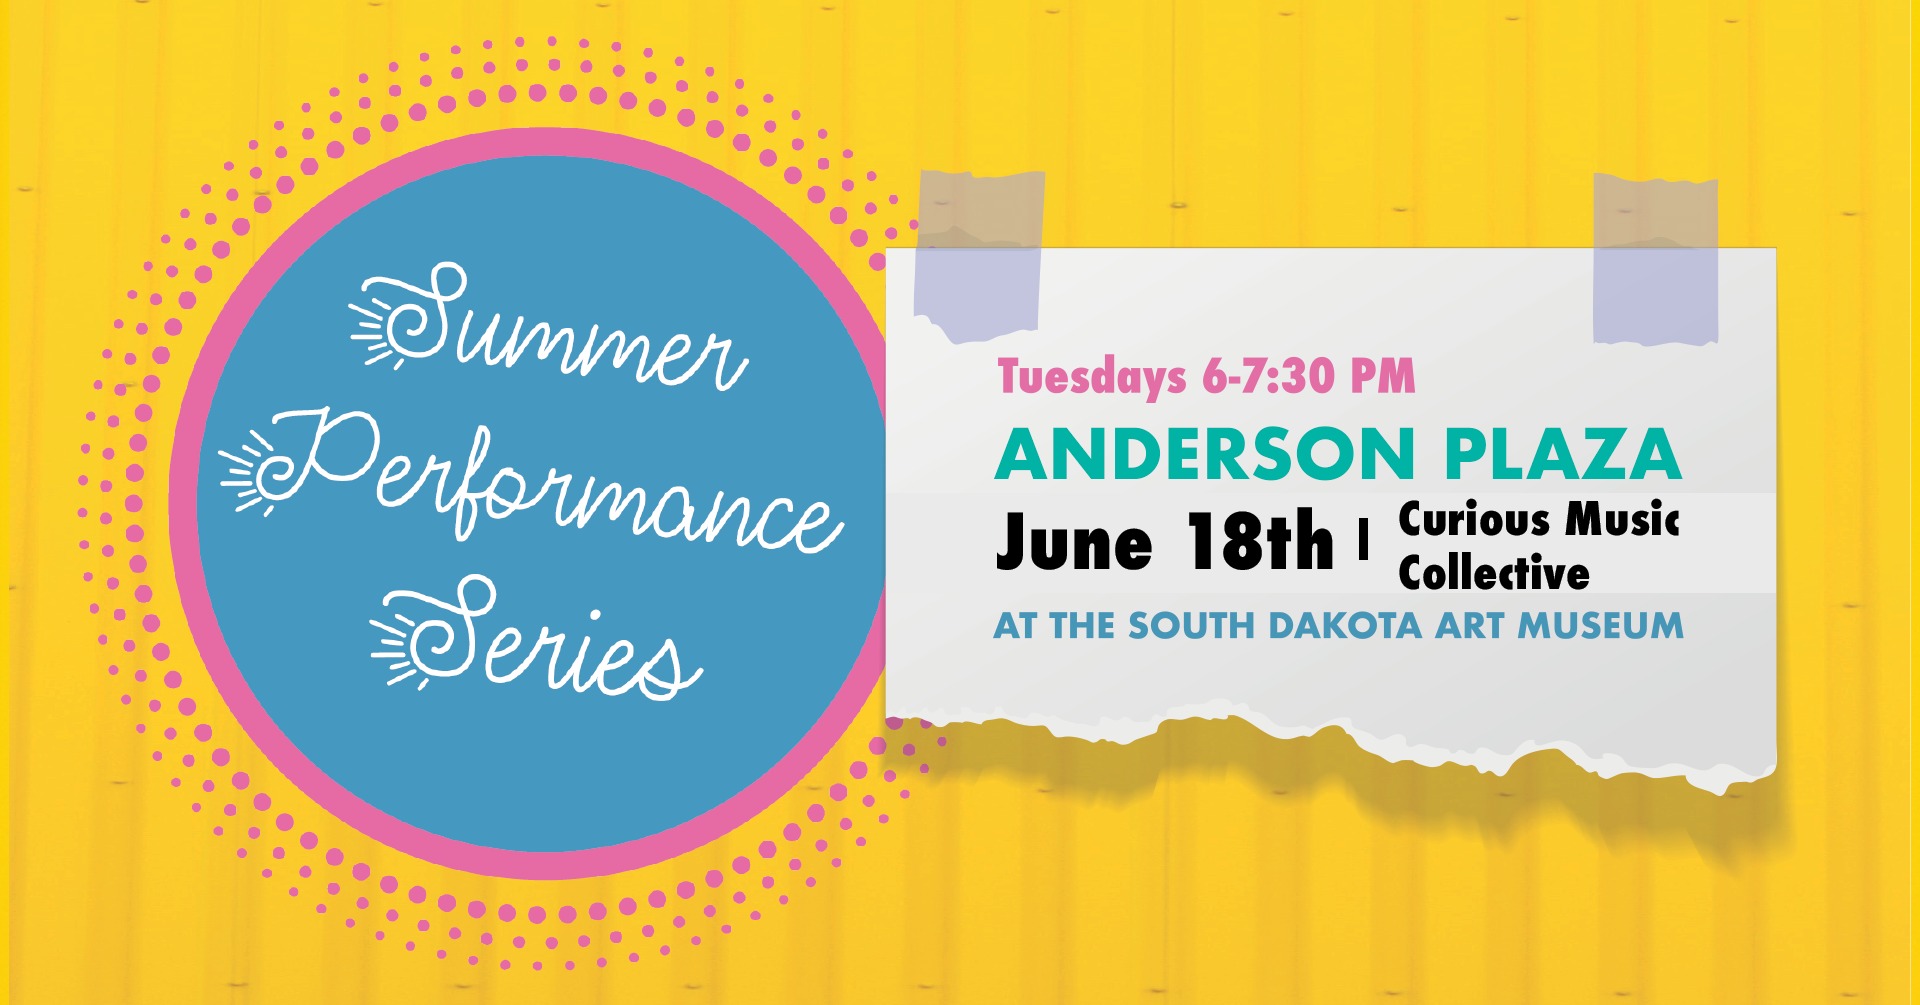 Anderson Plaza Summer Performance Series— Curious Music Collective